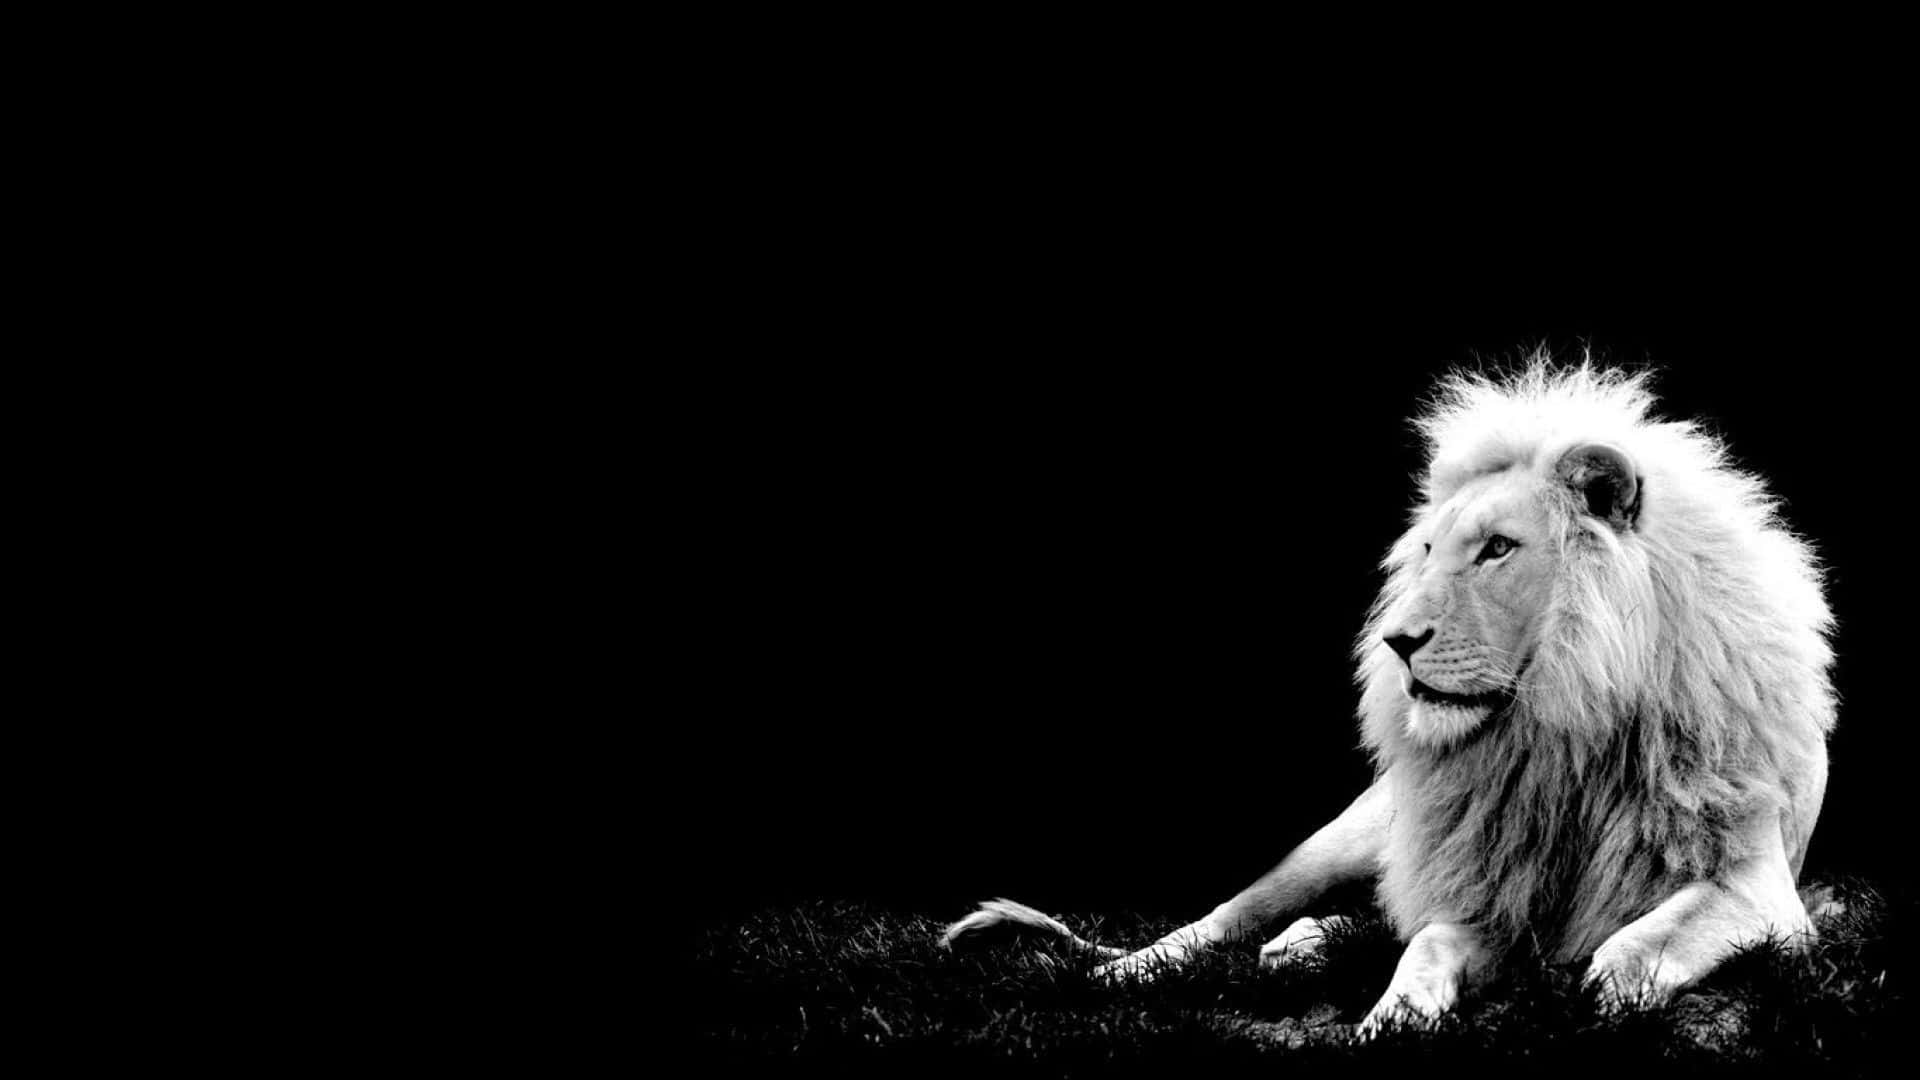 A portrait of nobility - Black and White Lion Wallpaper